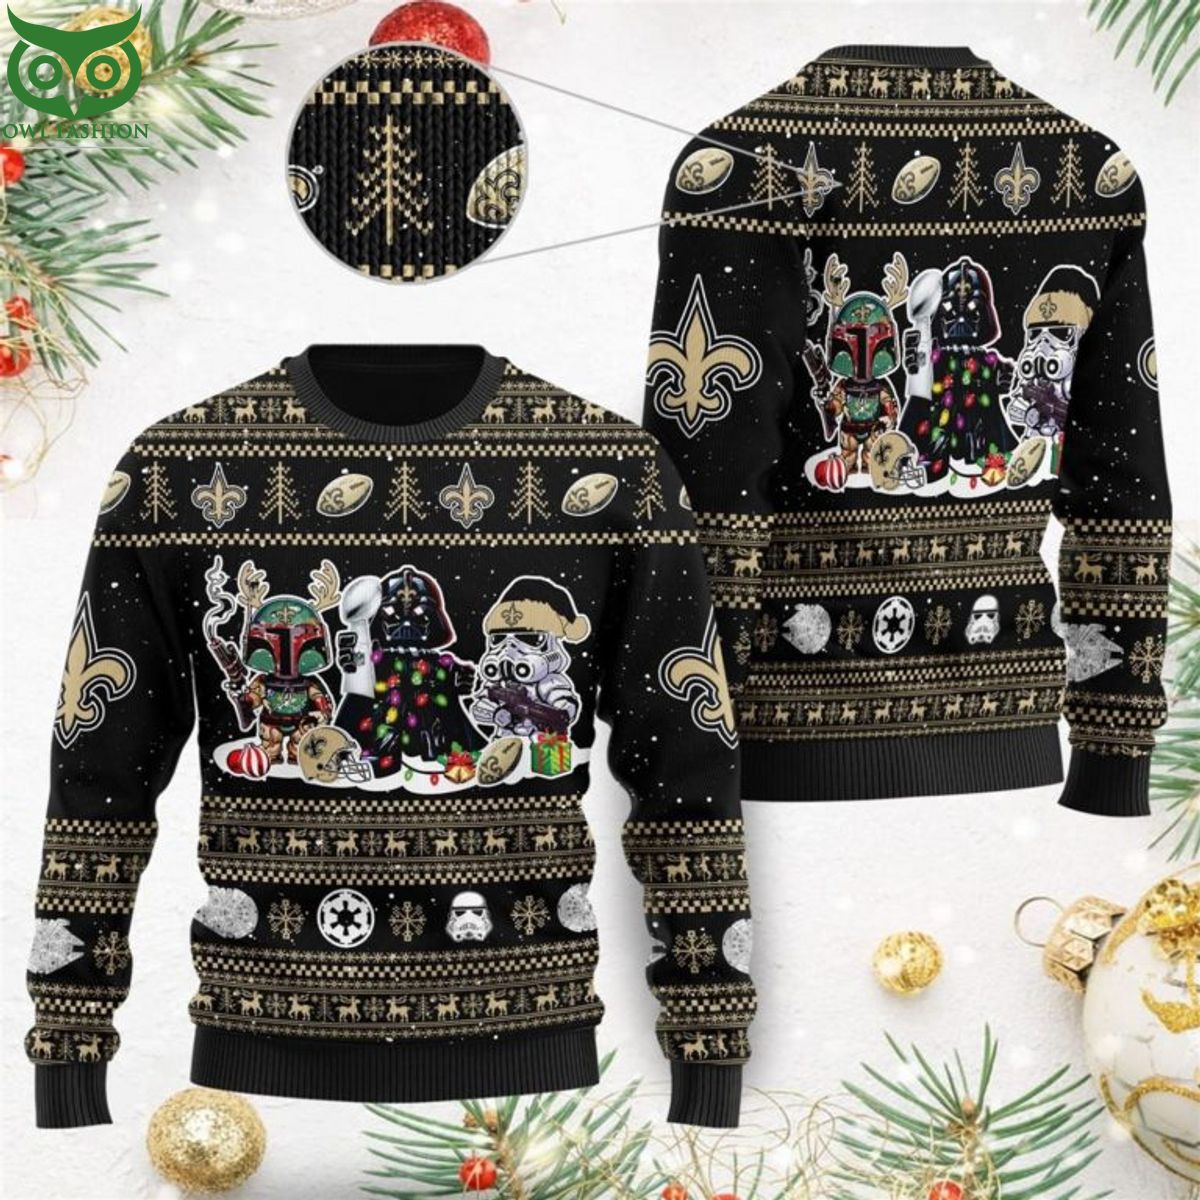 star wars new orleans saints ugly christmas sweater 1 AcNjz.jpg